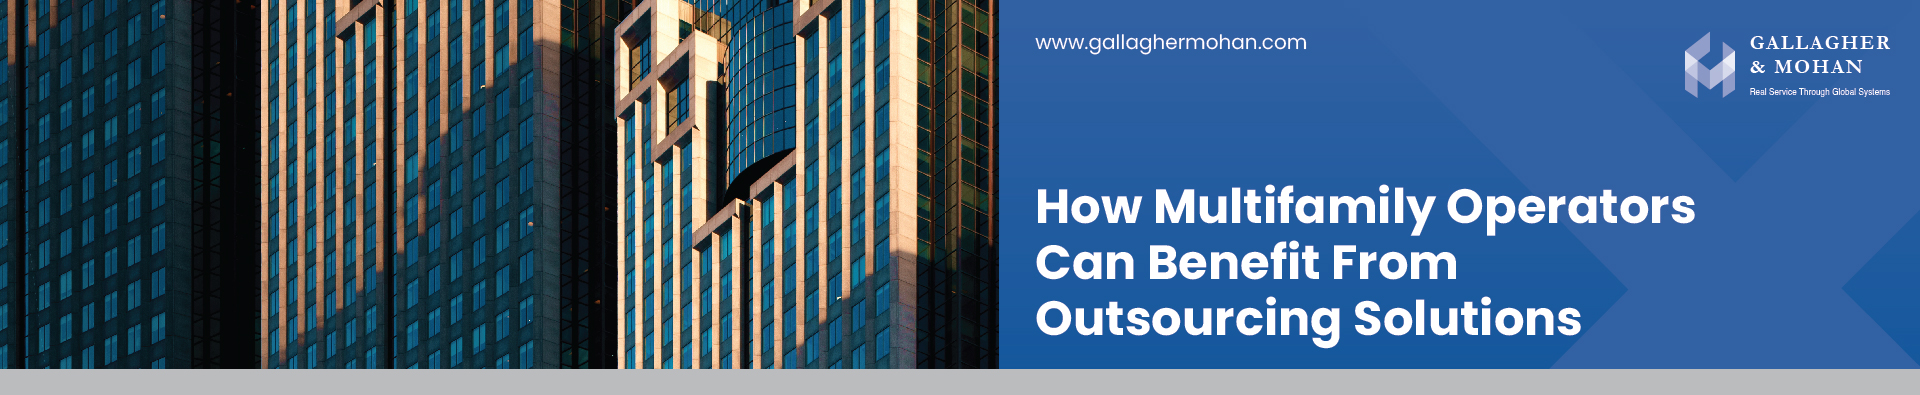 How Multifamily Operators Can Benefit From Outsourcing Solutions